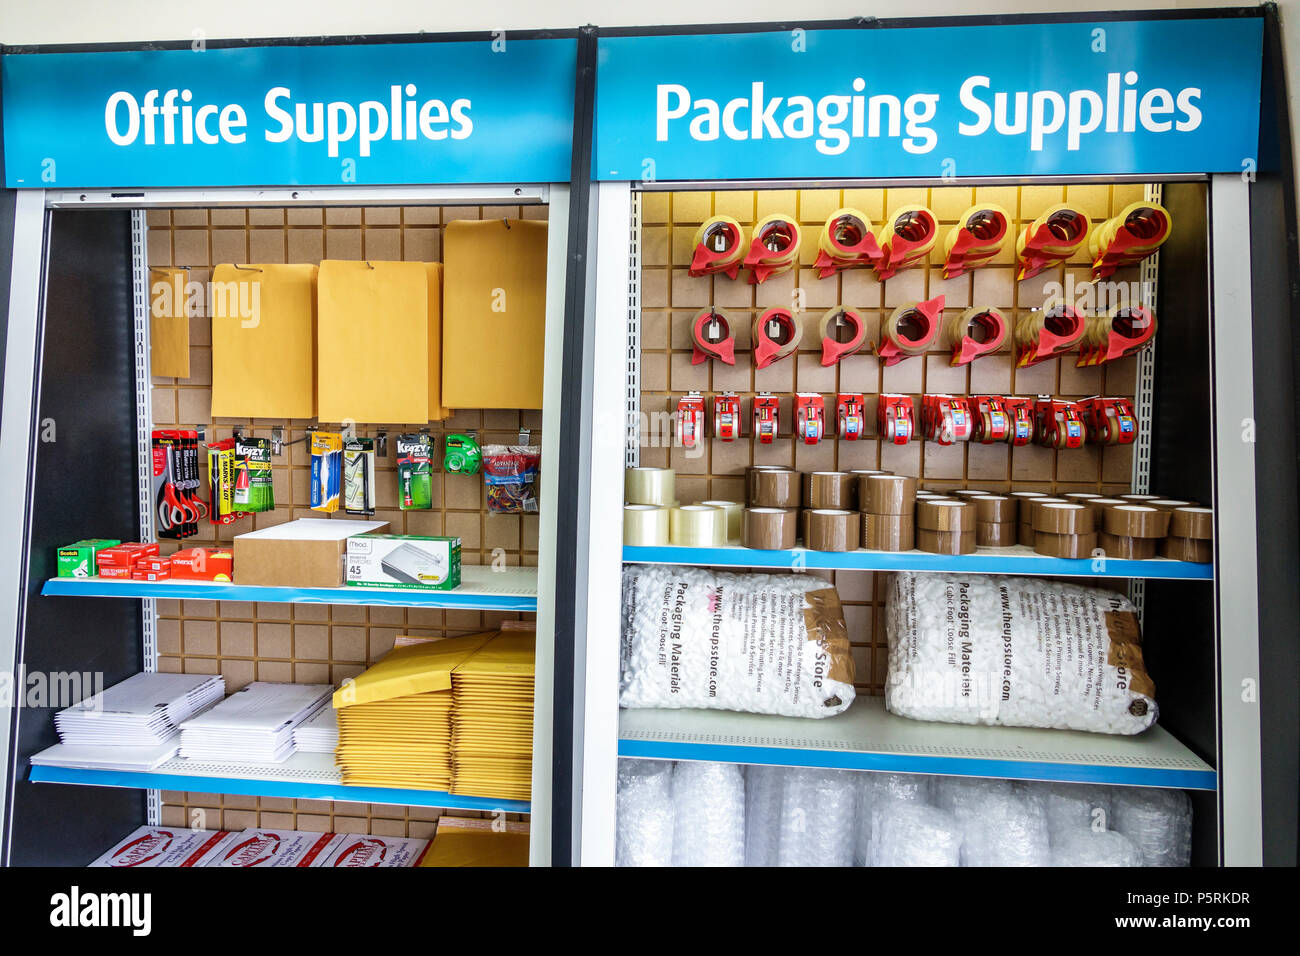 Miami Beach Florida,UPS Store,business services,interior inside,shipping,packing office supplies,yellow envelopes,tape,display sale shelves,FL17101500 Stock Photo